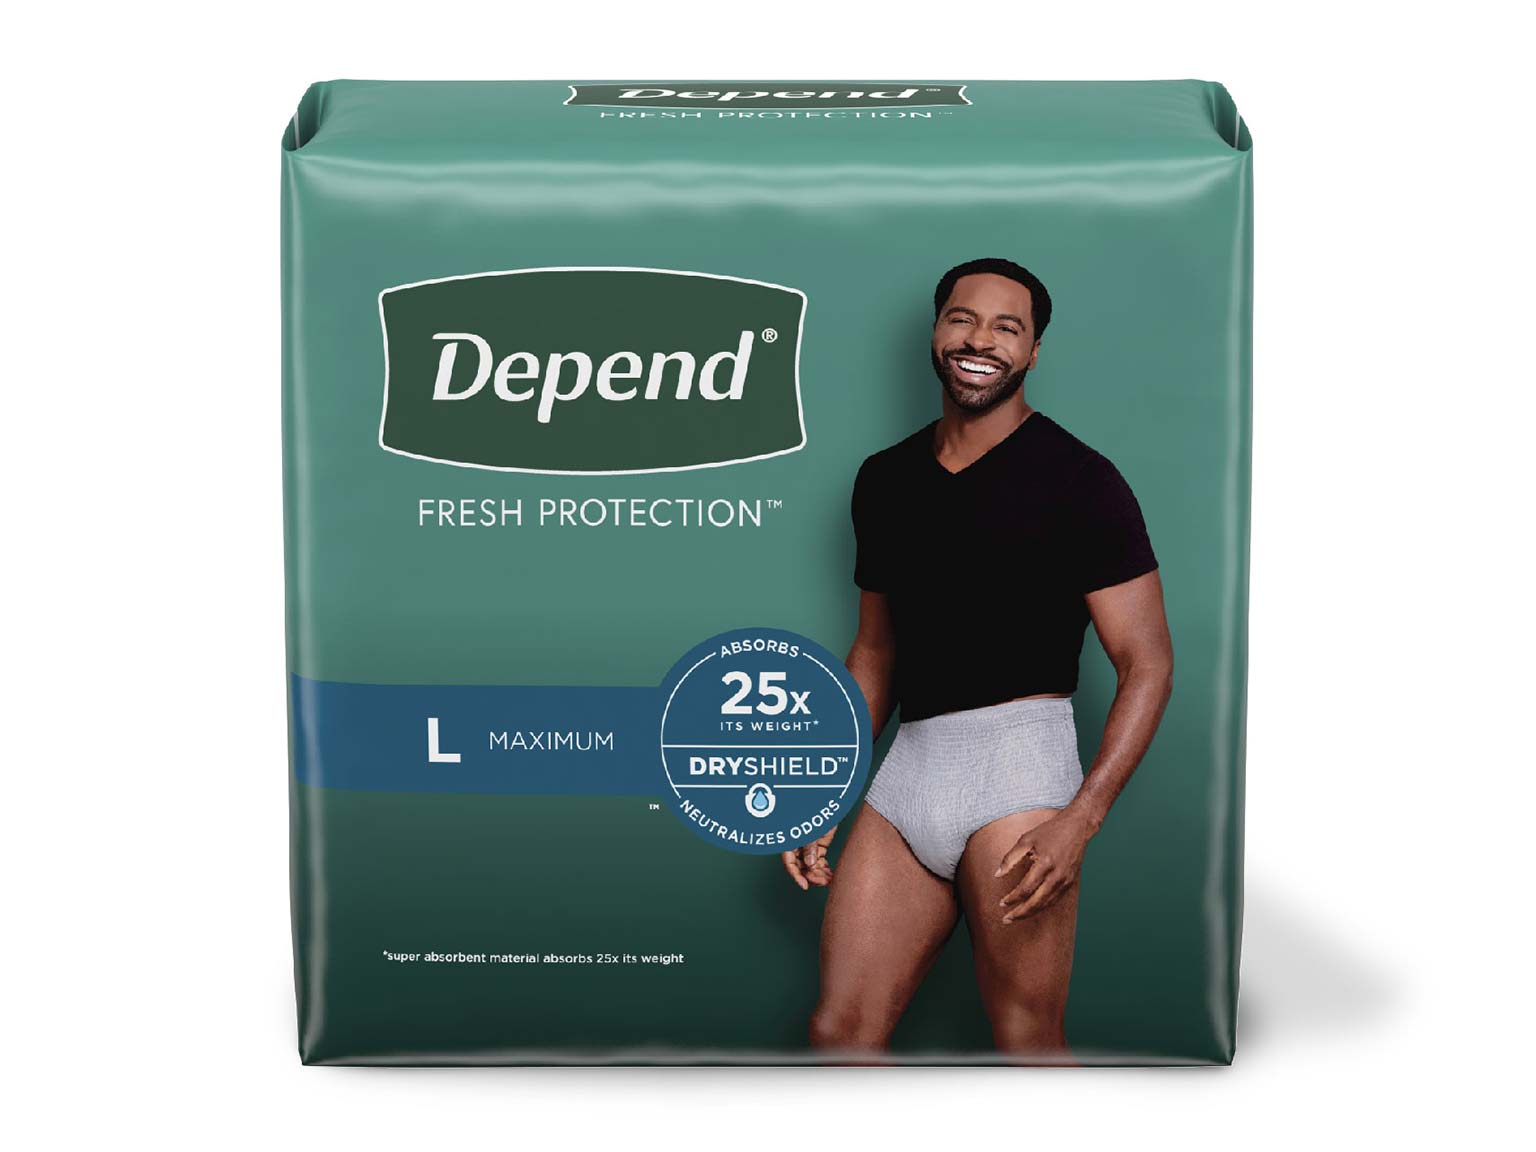 Depend Protection Plus Ultimate Underwear for Men X-Large - 80 Count 